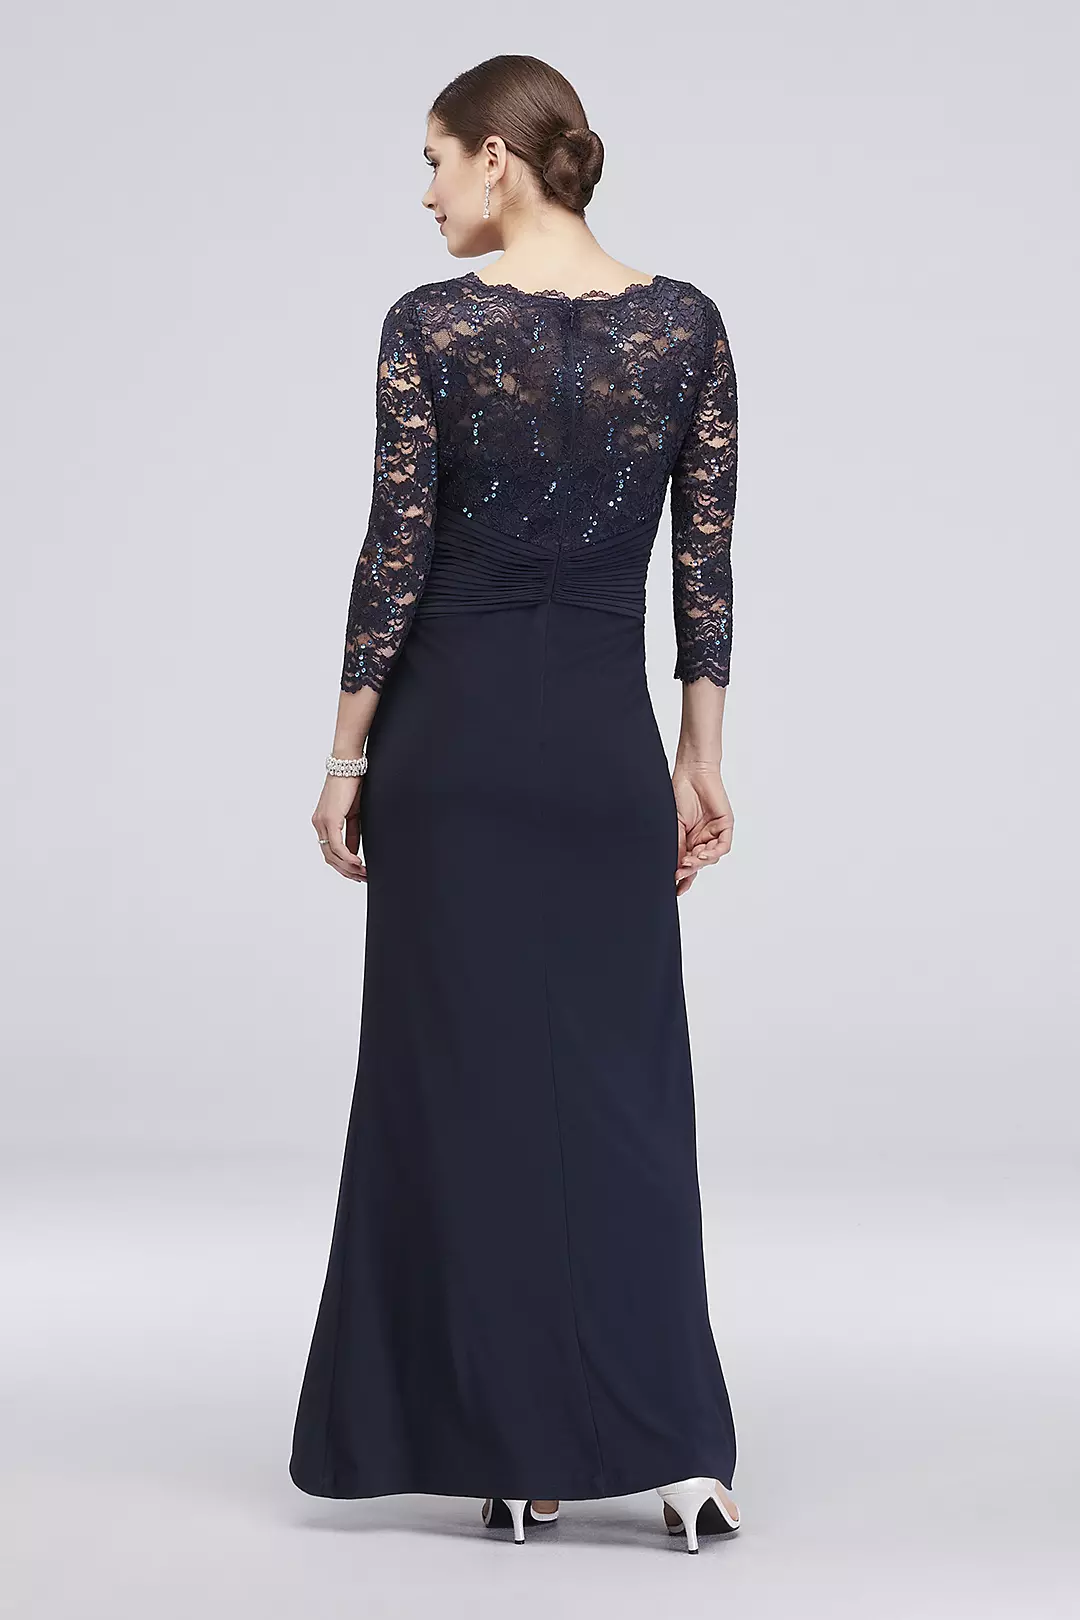 Long-Sleeve Lace and Jersey Cascade Dress Image 2